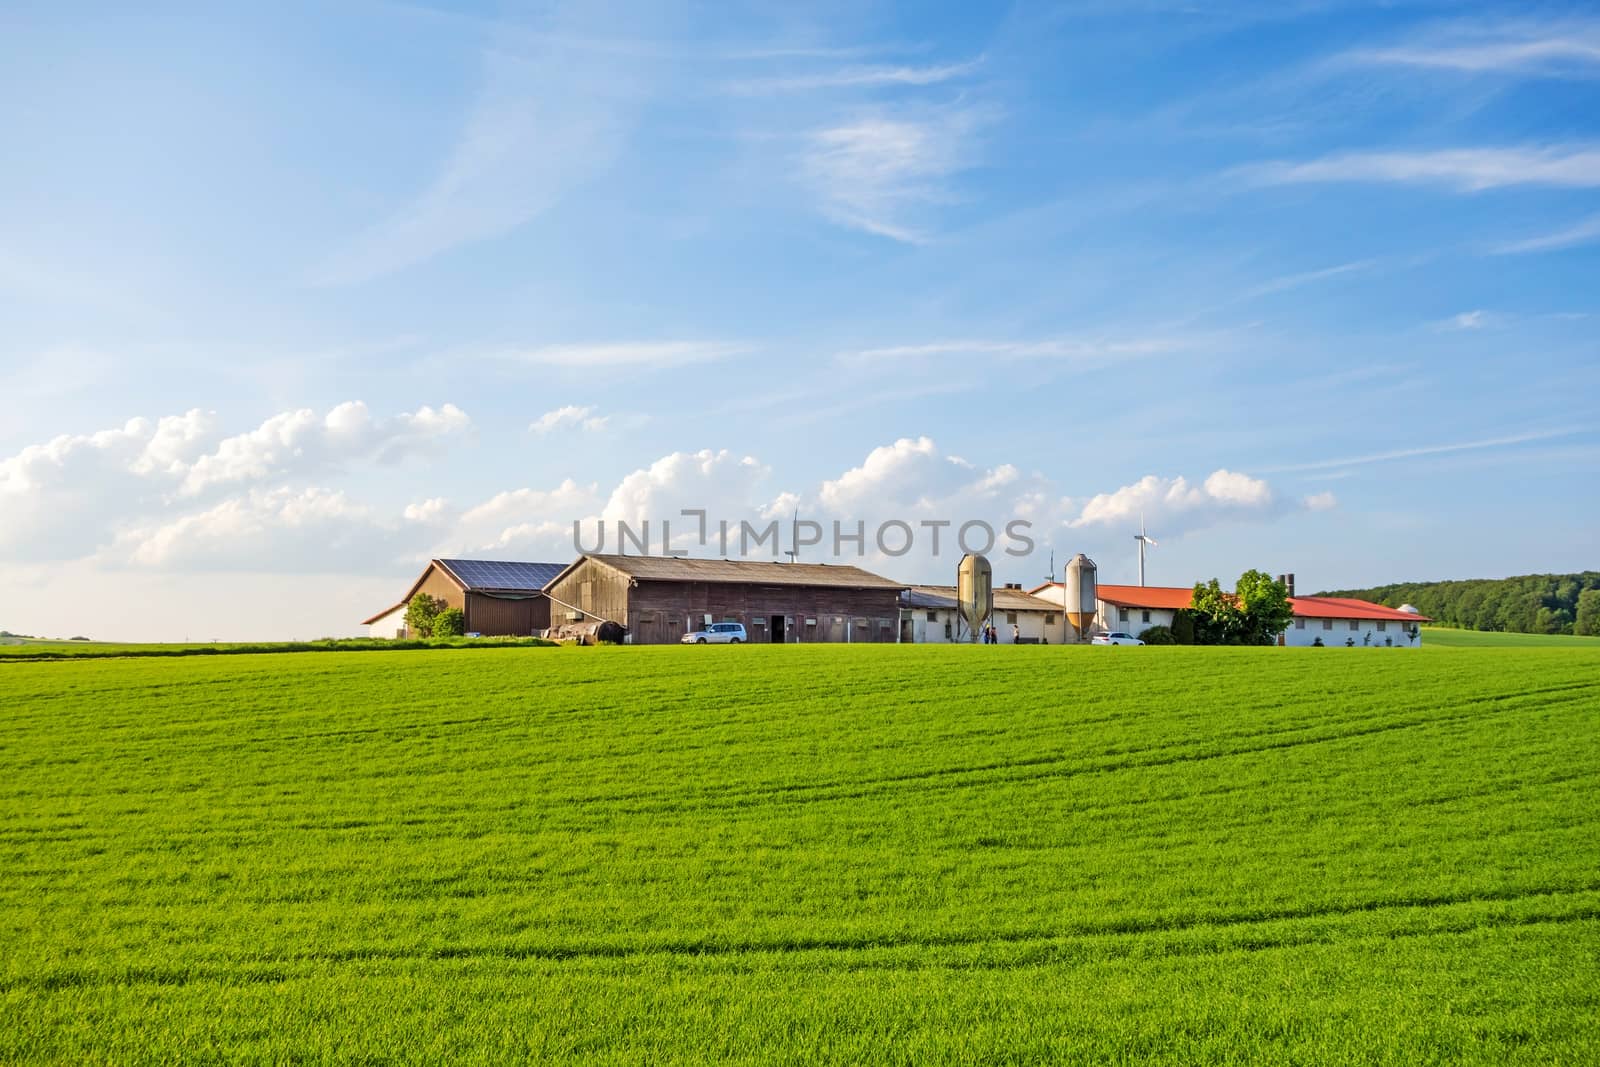 Bartholomae, Germany - May 26, 2016: Farm surrounded by green fields / meadow, blue sky